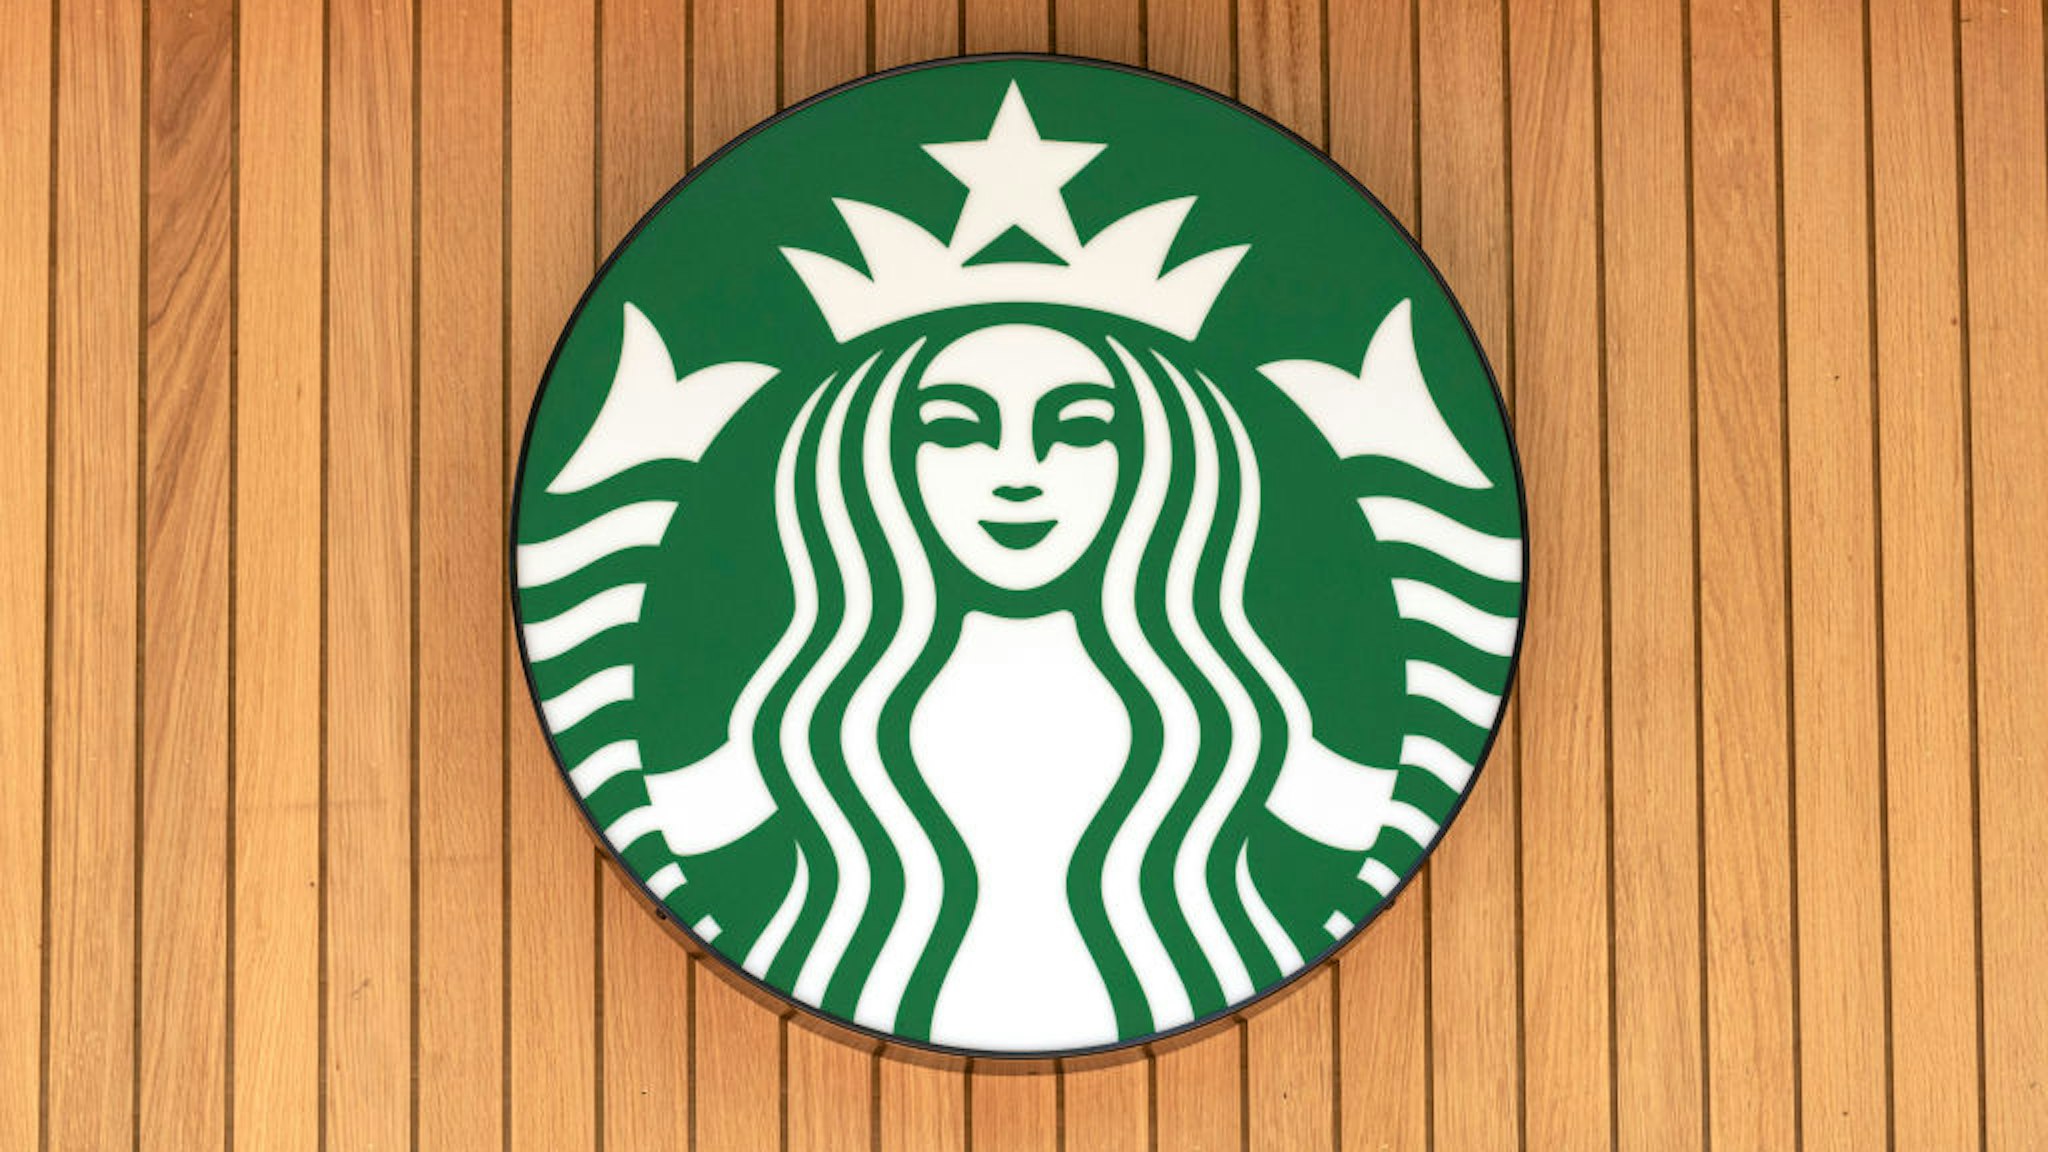 LONDON, UNITED KINGDOM - 2020/06/02: Starbucks logo seen on one of their branches.